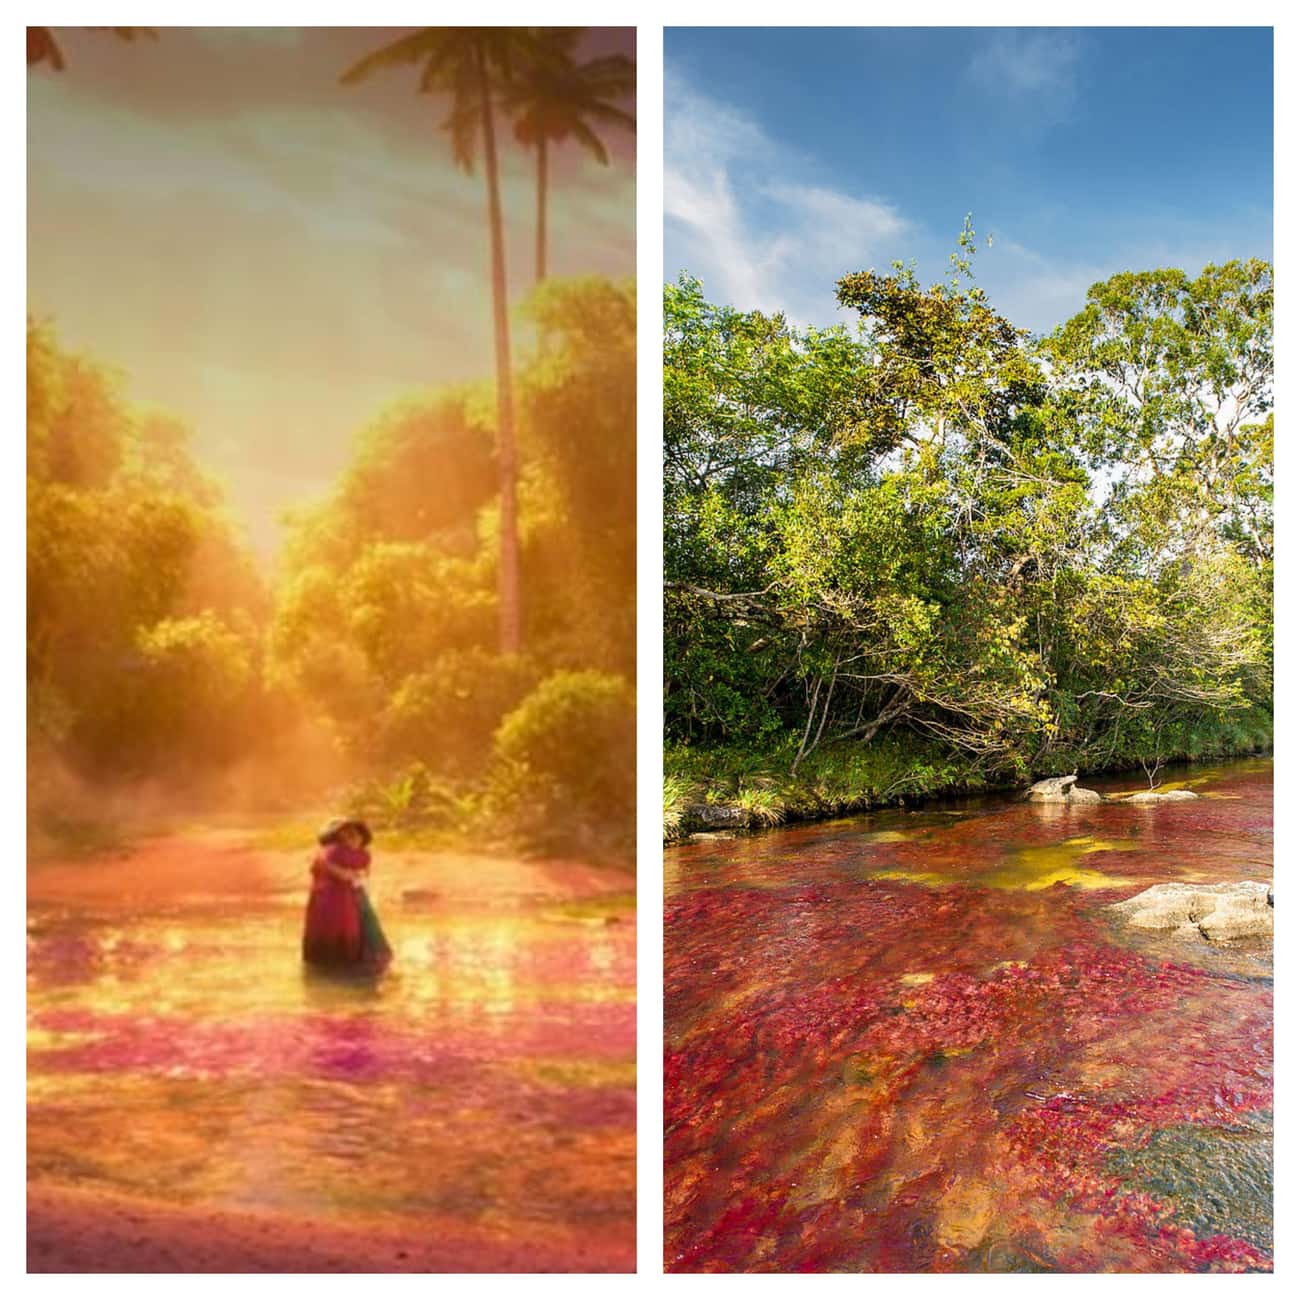 The Magical River From ‘Encanto’ Resembles Colombia’s ‘River Of Five Colors’ 